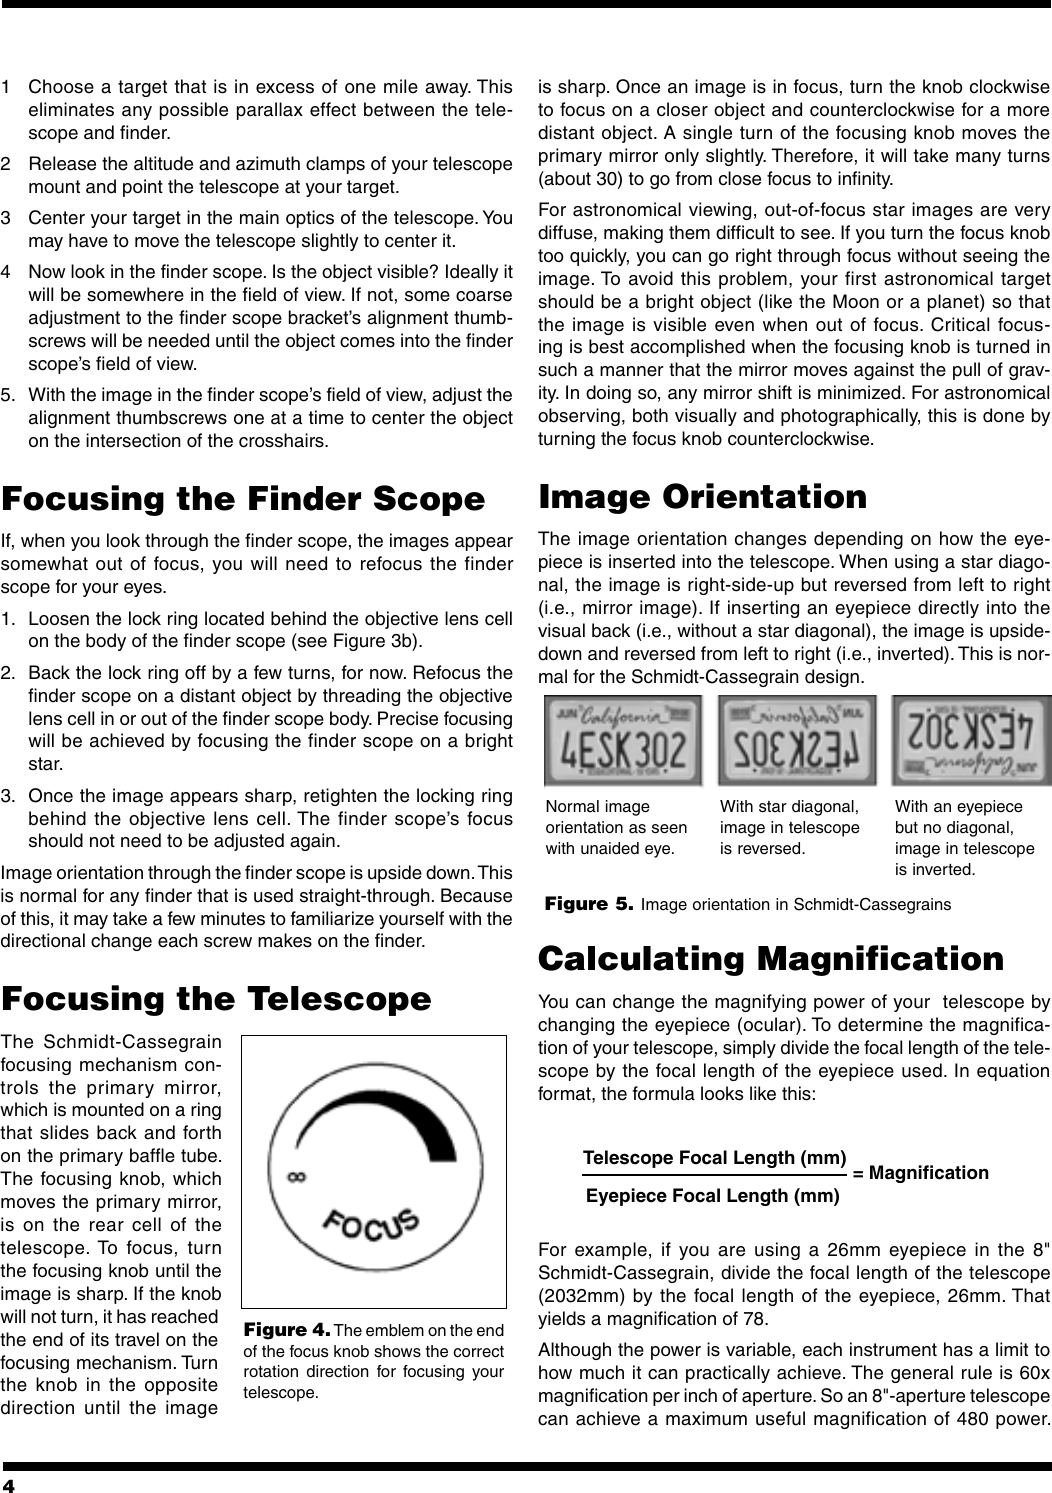 Page 4 of 8 - Orion Orion-Schmidt-Cassegrain-Telescopes-8-9-25-And-11-Users-Manual- IN 265_RevA_Orion_SCTs  Orion-schmidt-cassegrain-telescopes-8-9-25-and-11-users-manual